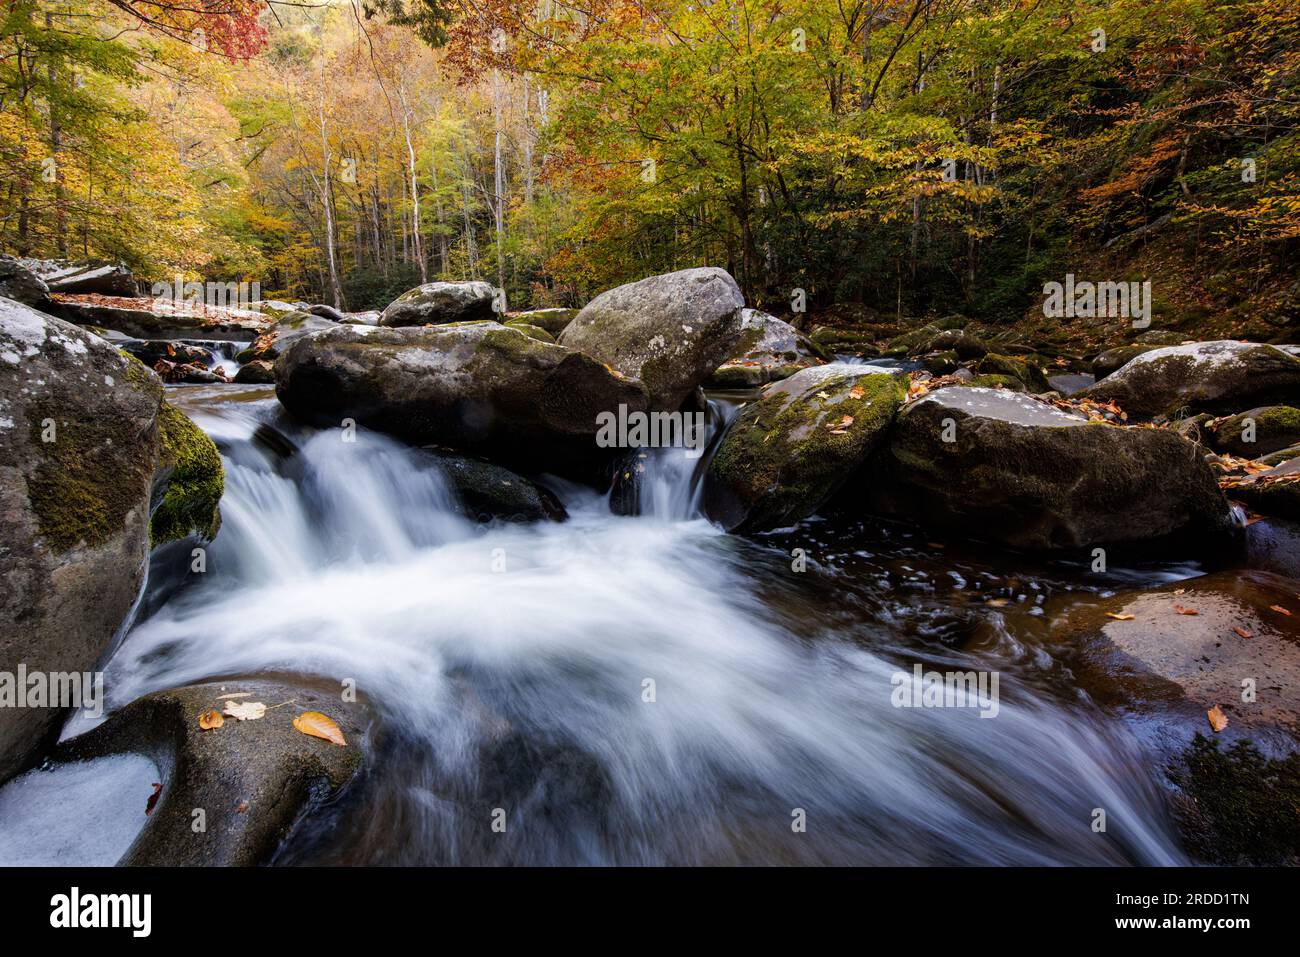 Water rushes through a rock garden along the Middle Prong Little River in the Tremont area. Stock Photo